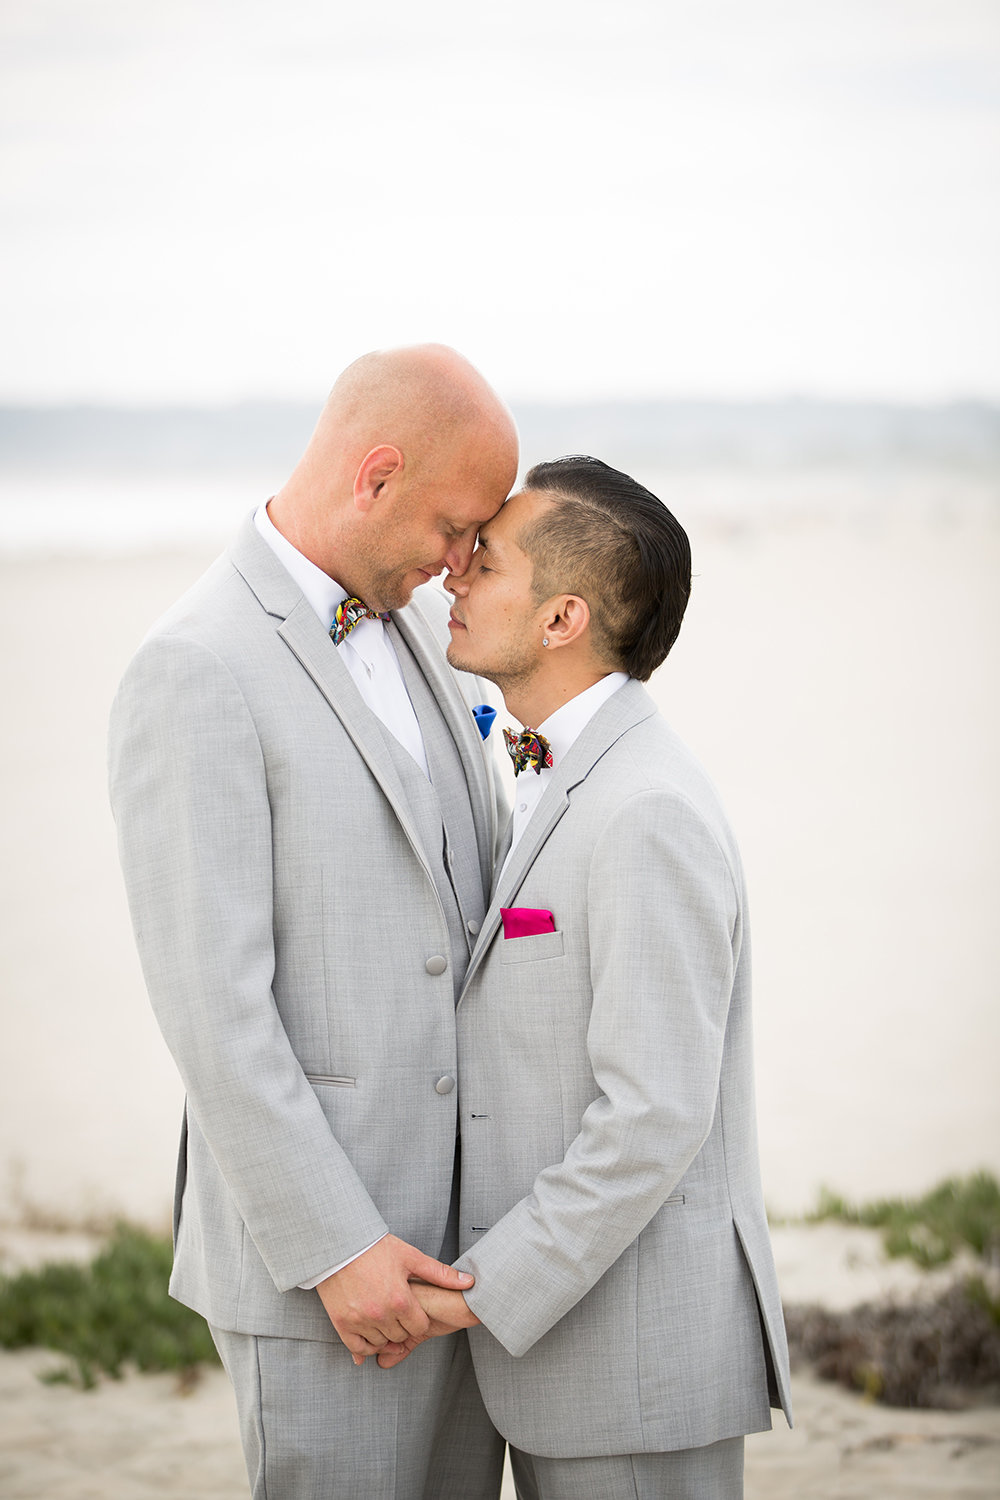 Grooms share a sweet moment at beach in Coronado